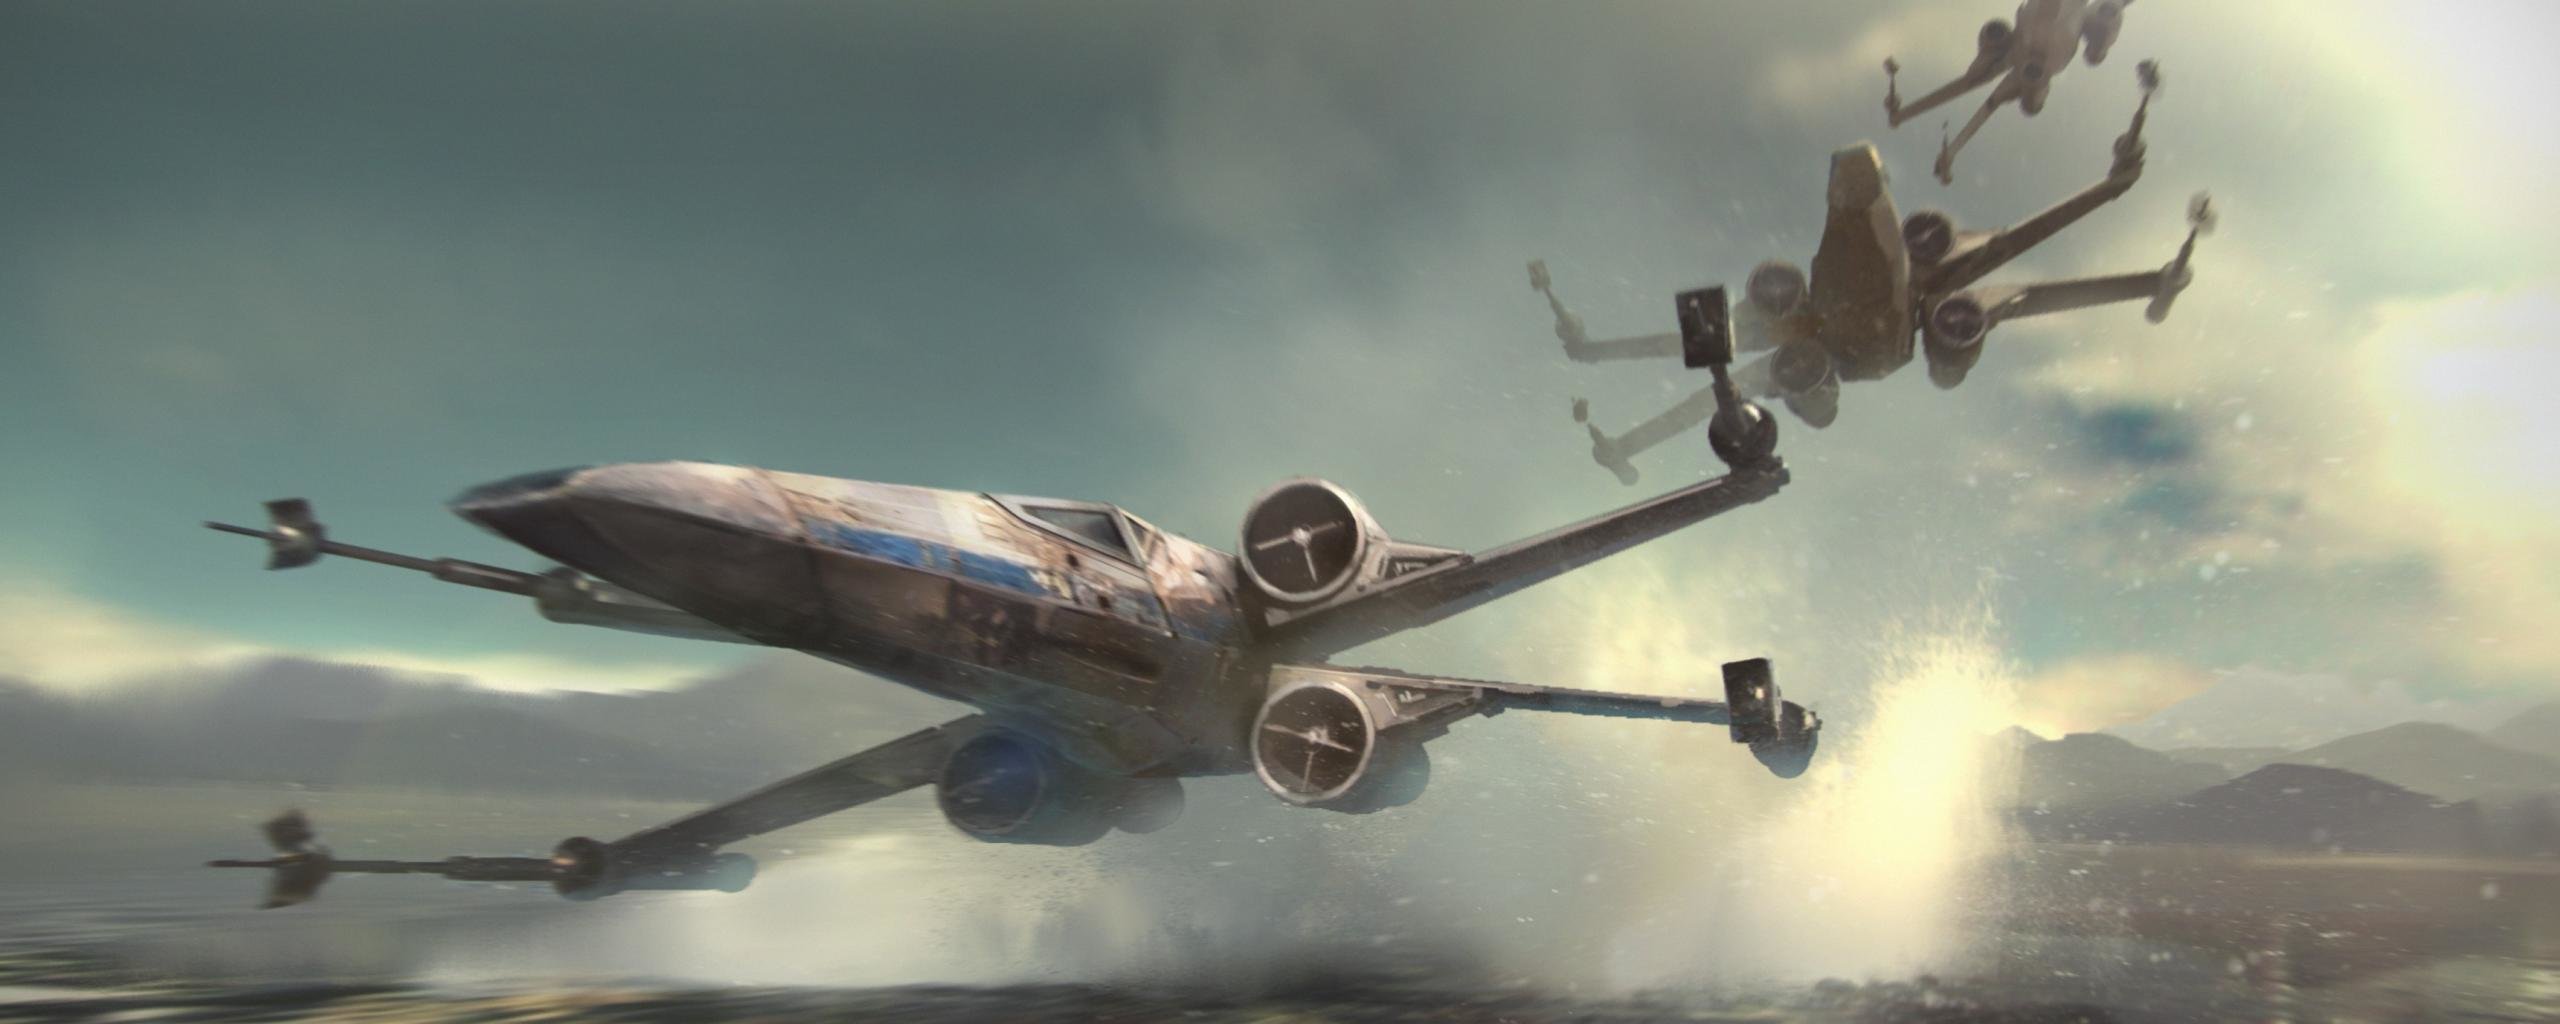 Dual Monitor X Wing Wallpapers Hd Backgrounds